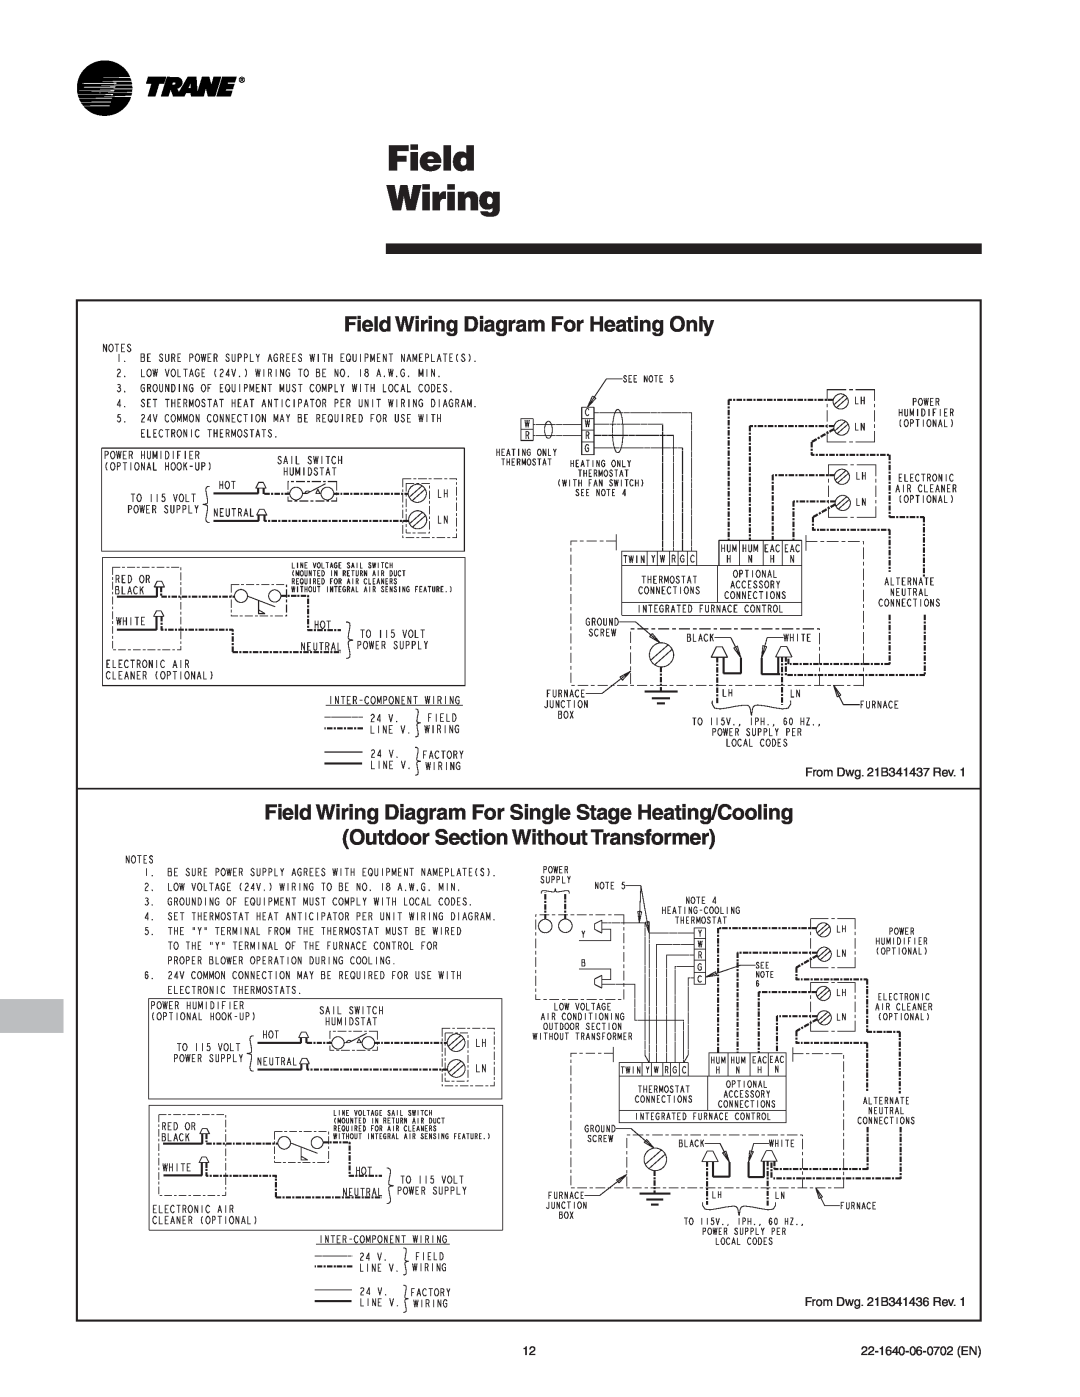 Trane FURN-PRC001-EN manual Field Wiring Diagram For Heating Only, Outdoor Section Without Transformer 